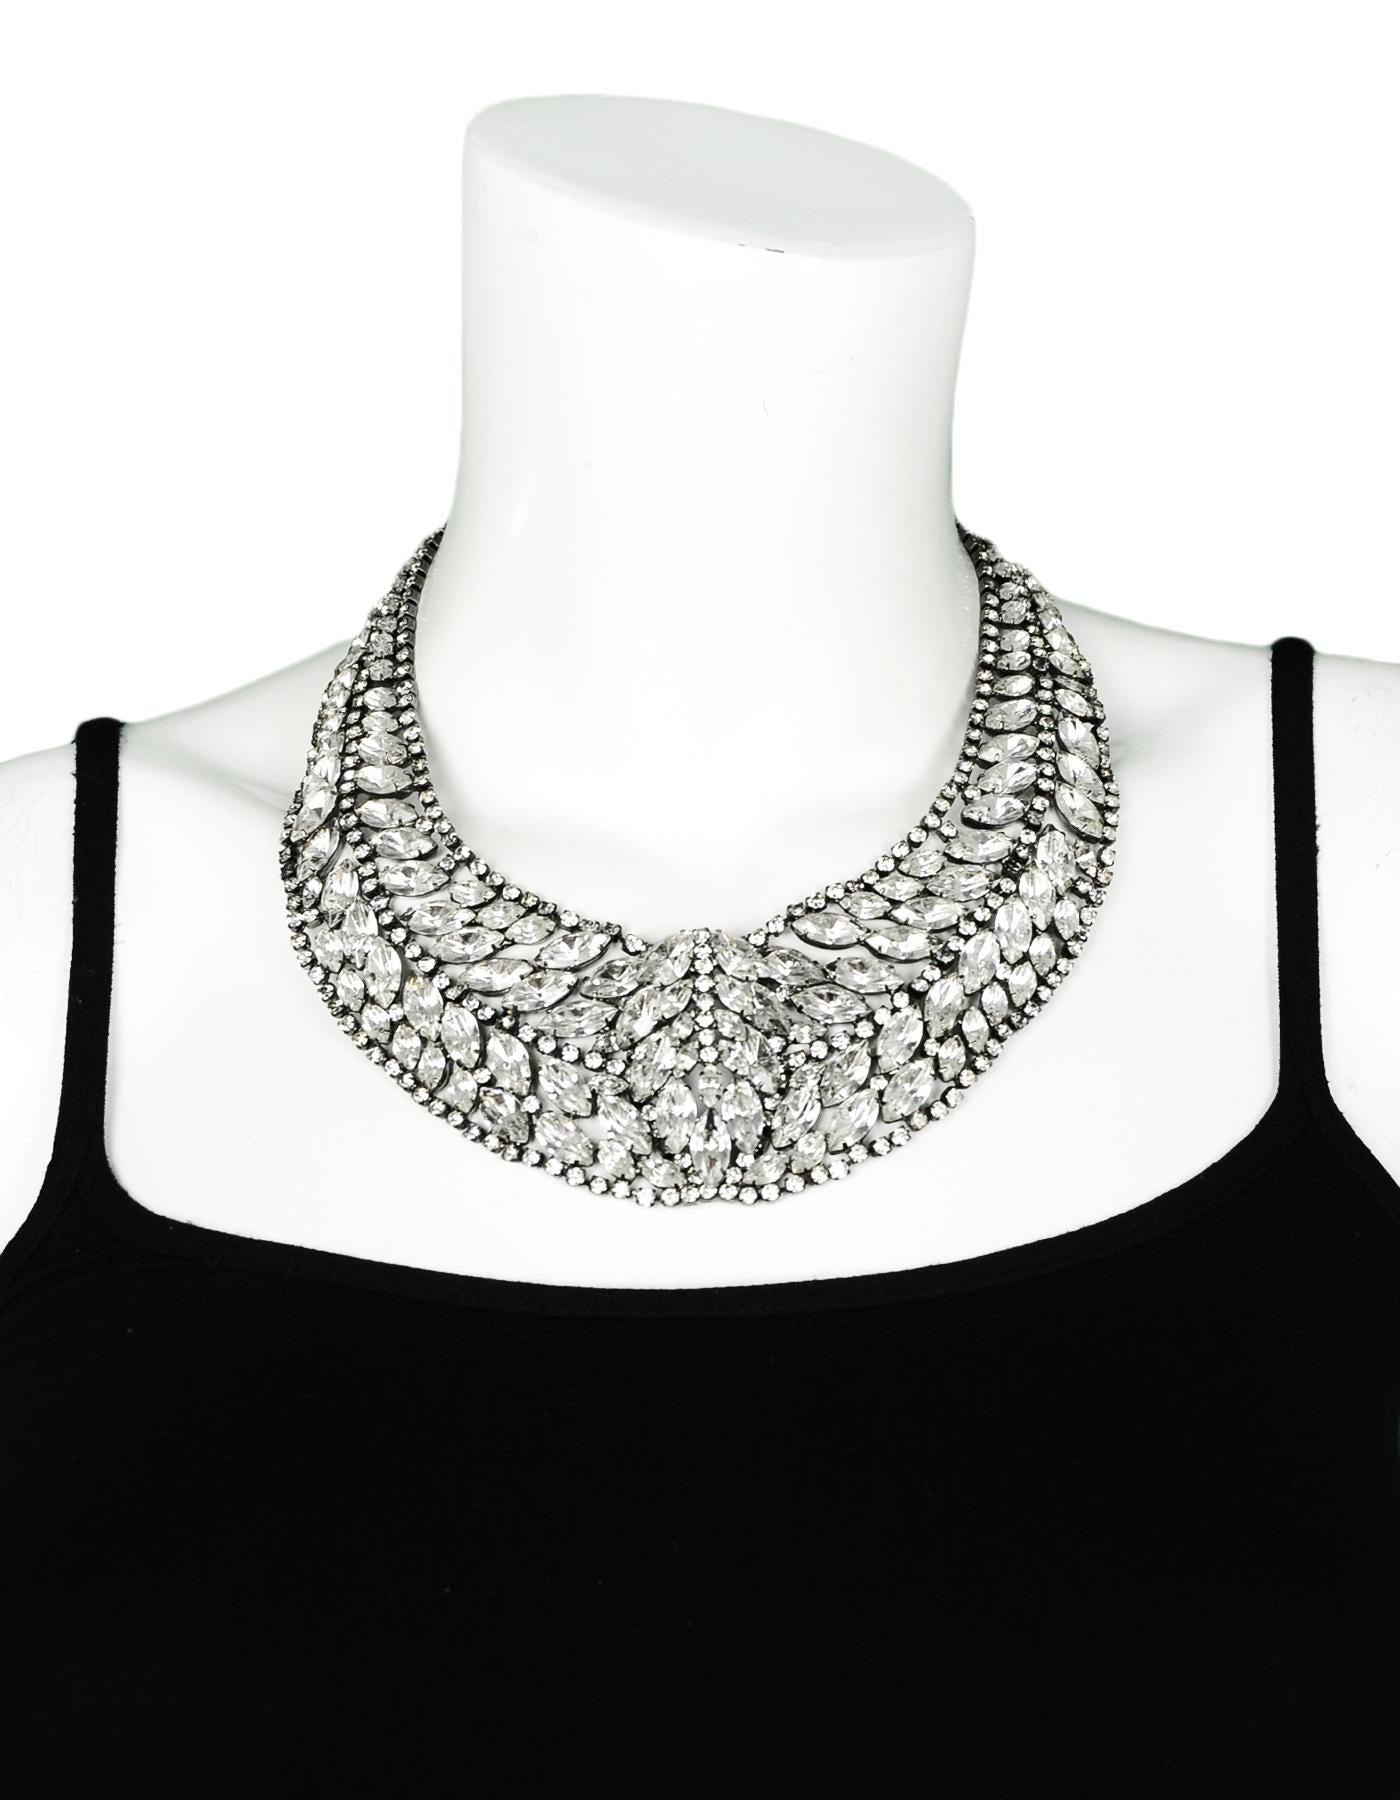 Elizabeth Cole Swarovski Crystal Hematite Plated Bib Necklace

Color: Silver
Materials: Crystalline, Hematite, Metal
Closure/Opening: Push clasp
Overall Condition: Excellent pre-own condition. One crystal in the front left has broken off on one